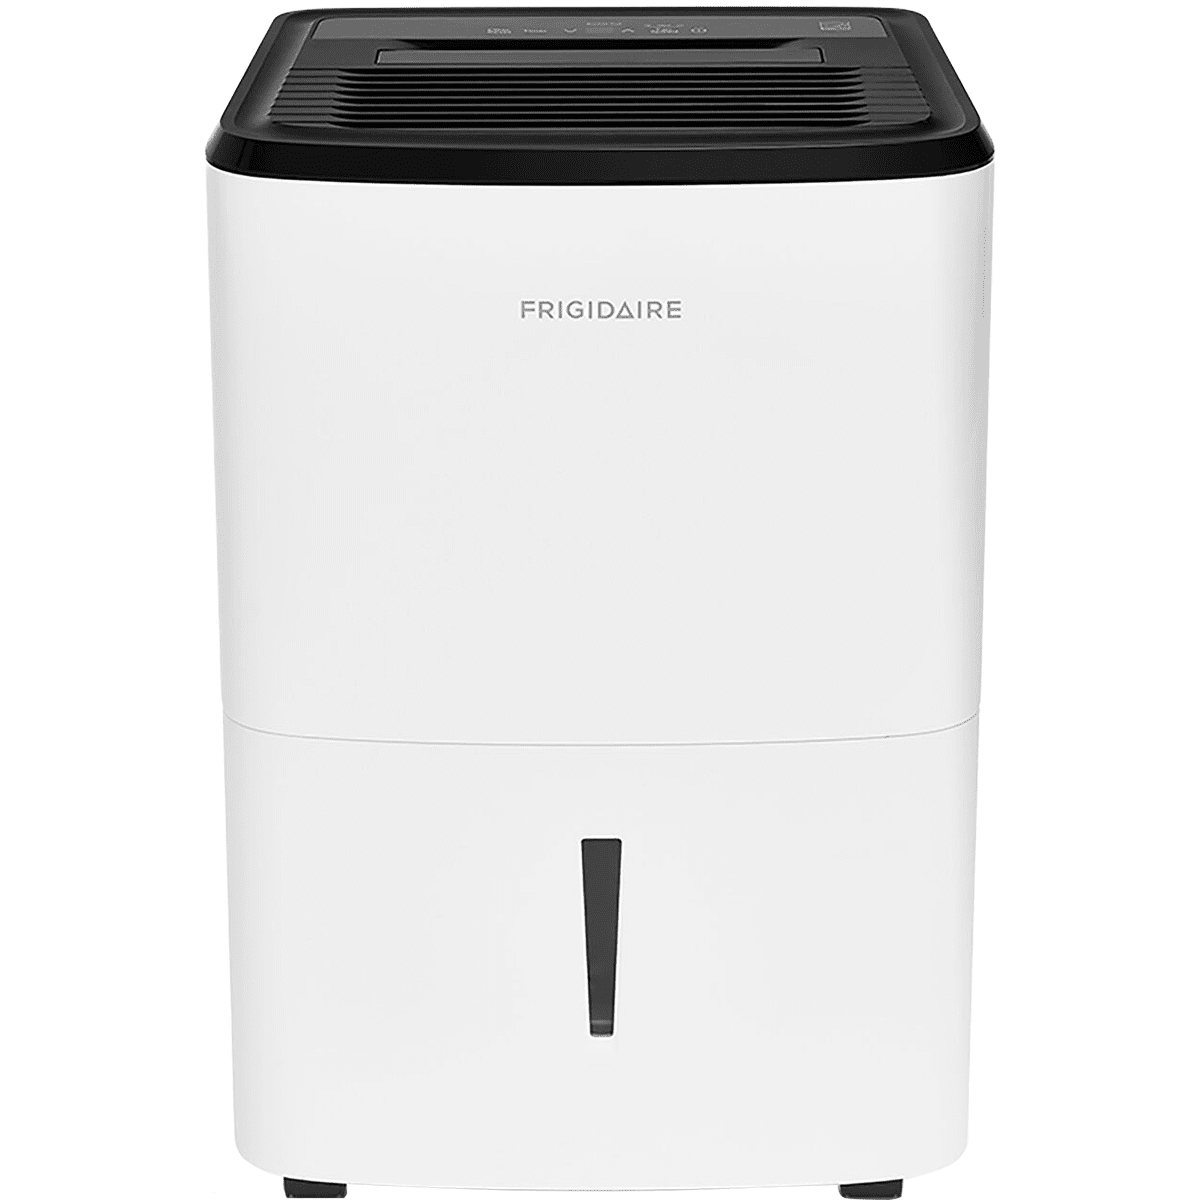 Frigidaire High Humidity 50 Pint Dehumidifier (Energy Star Most Efficient) - without Pump